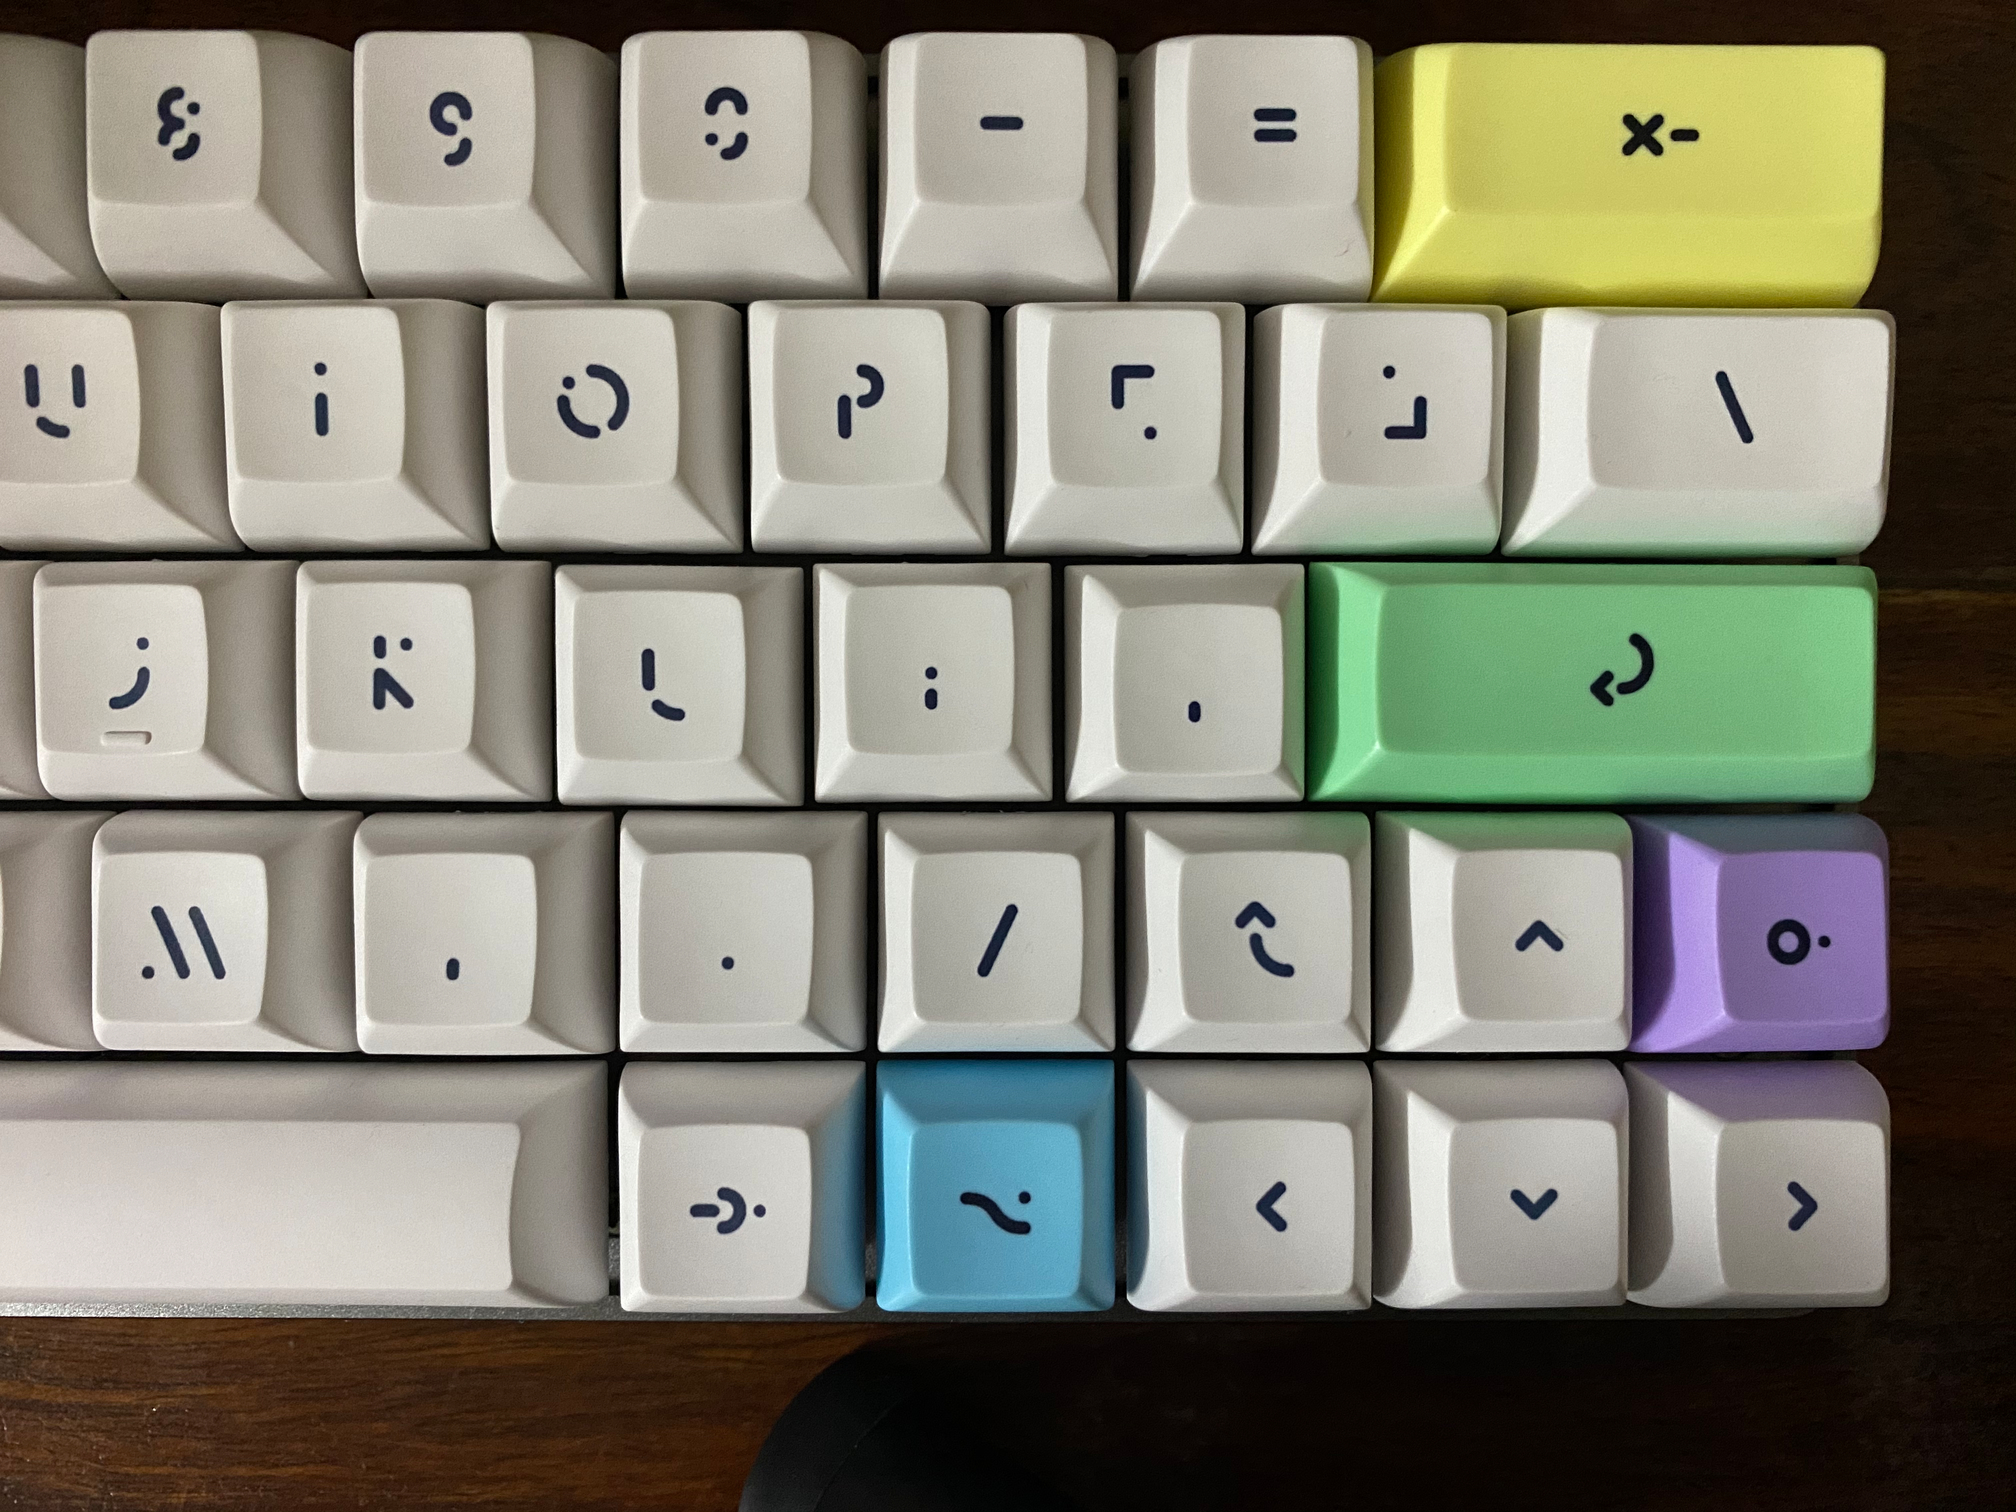 KAT Keycaps, A Closer Look; Updated 7/27/2018